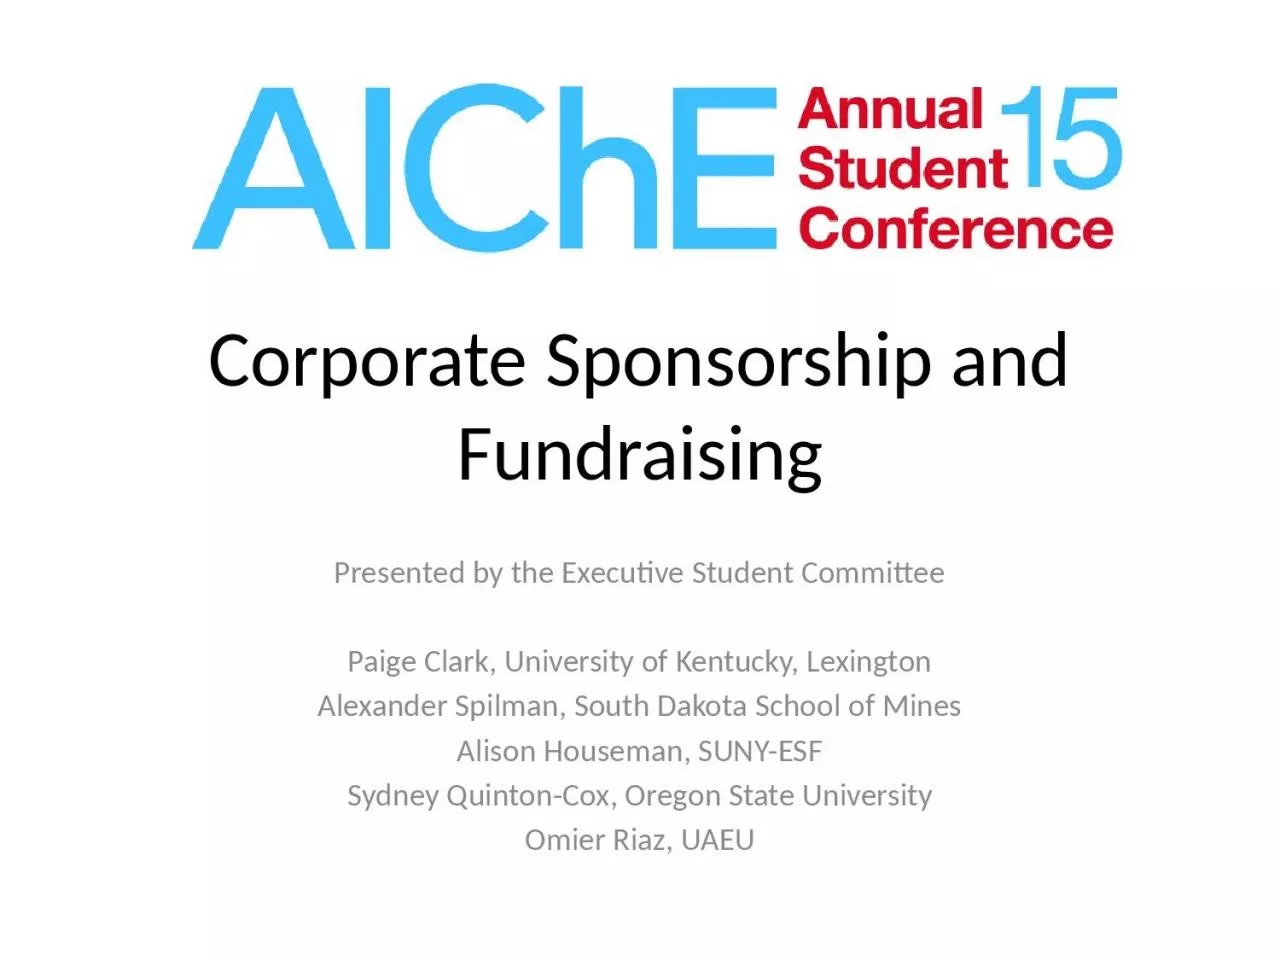 Corporate Sponsorship and Fundraising